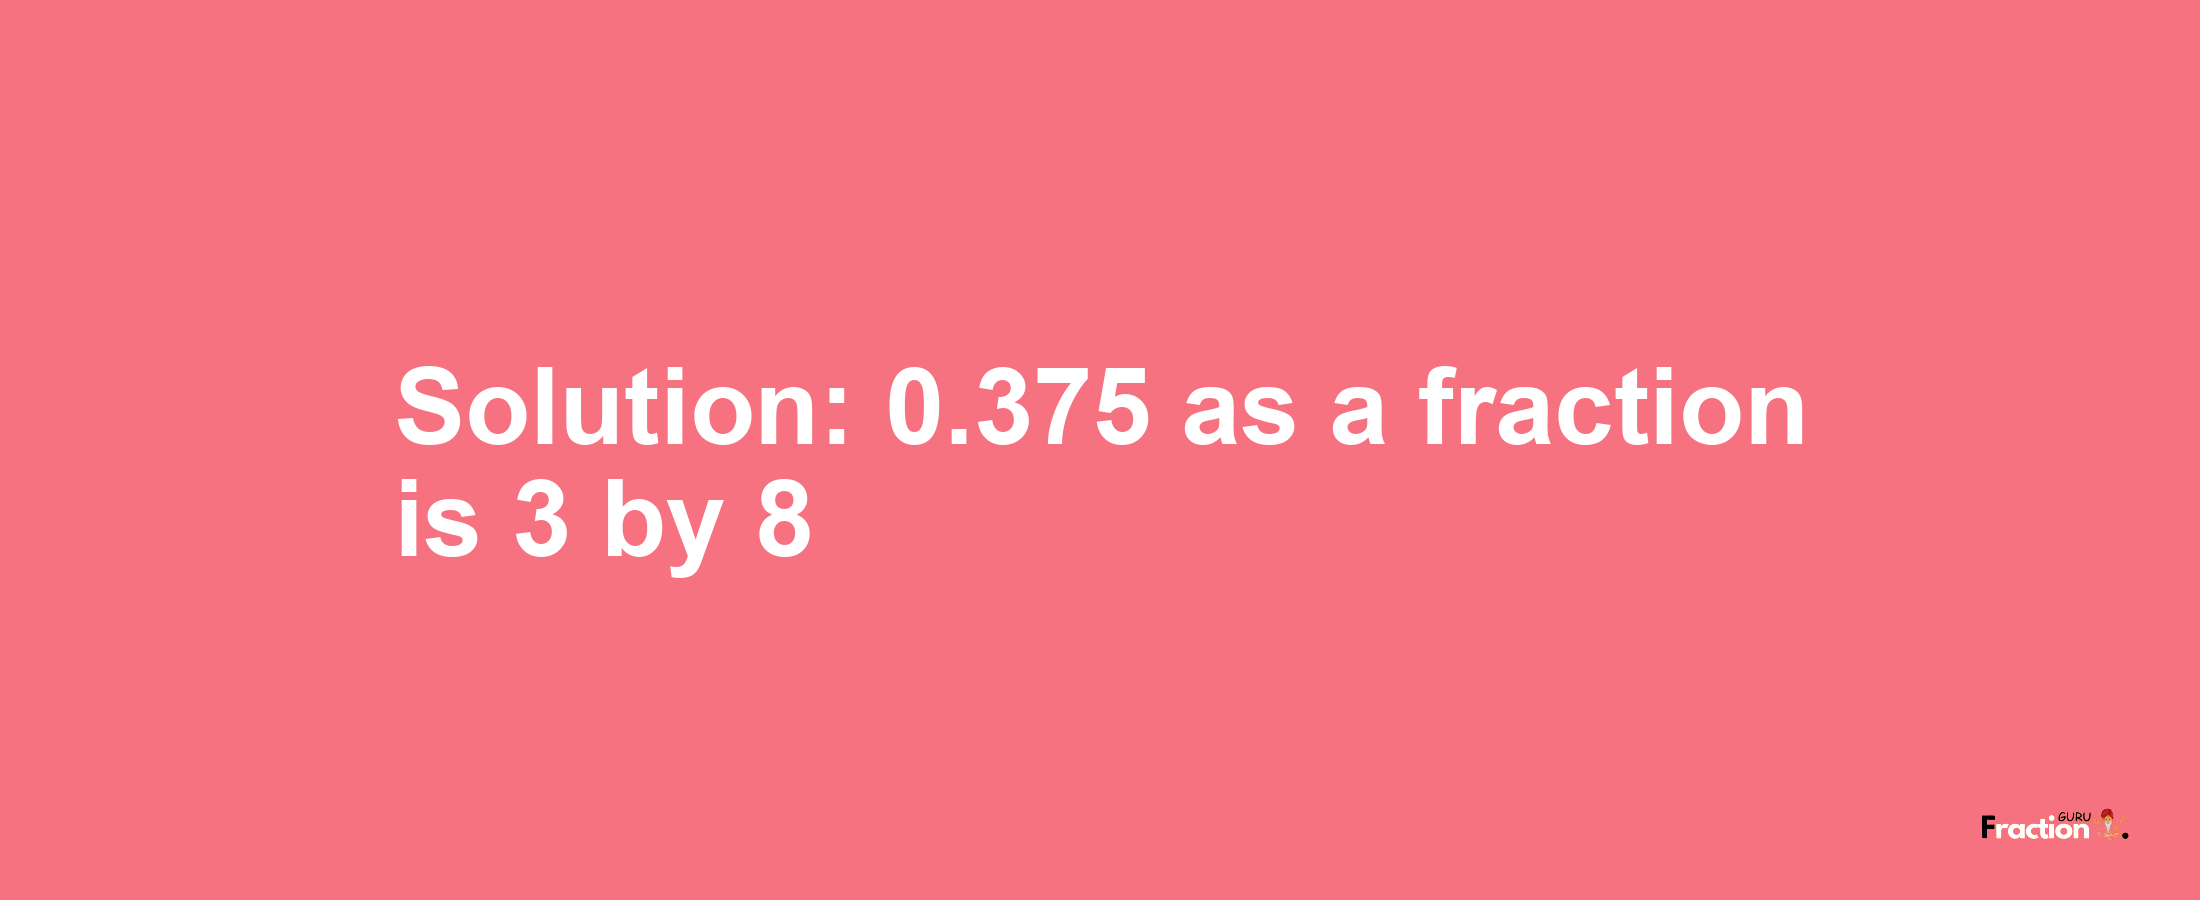 Solution:0.375 as a fraction is 3/8